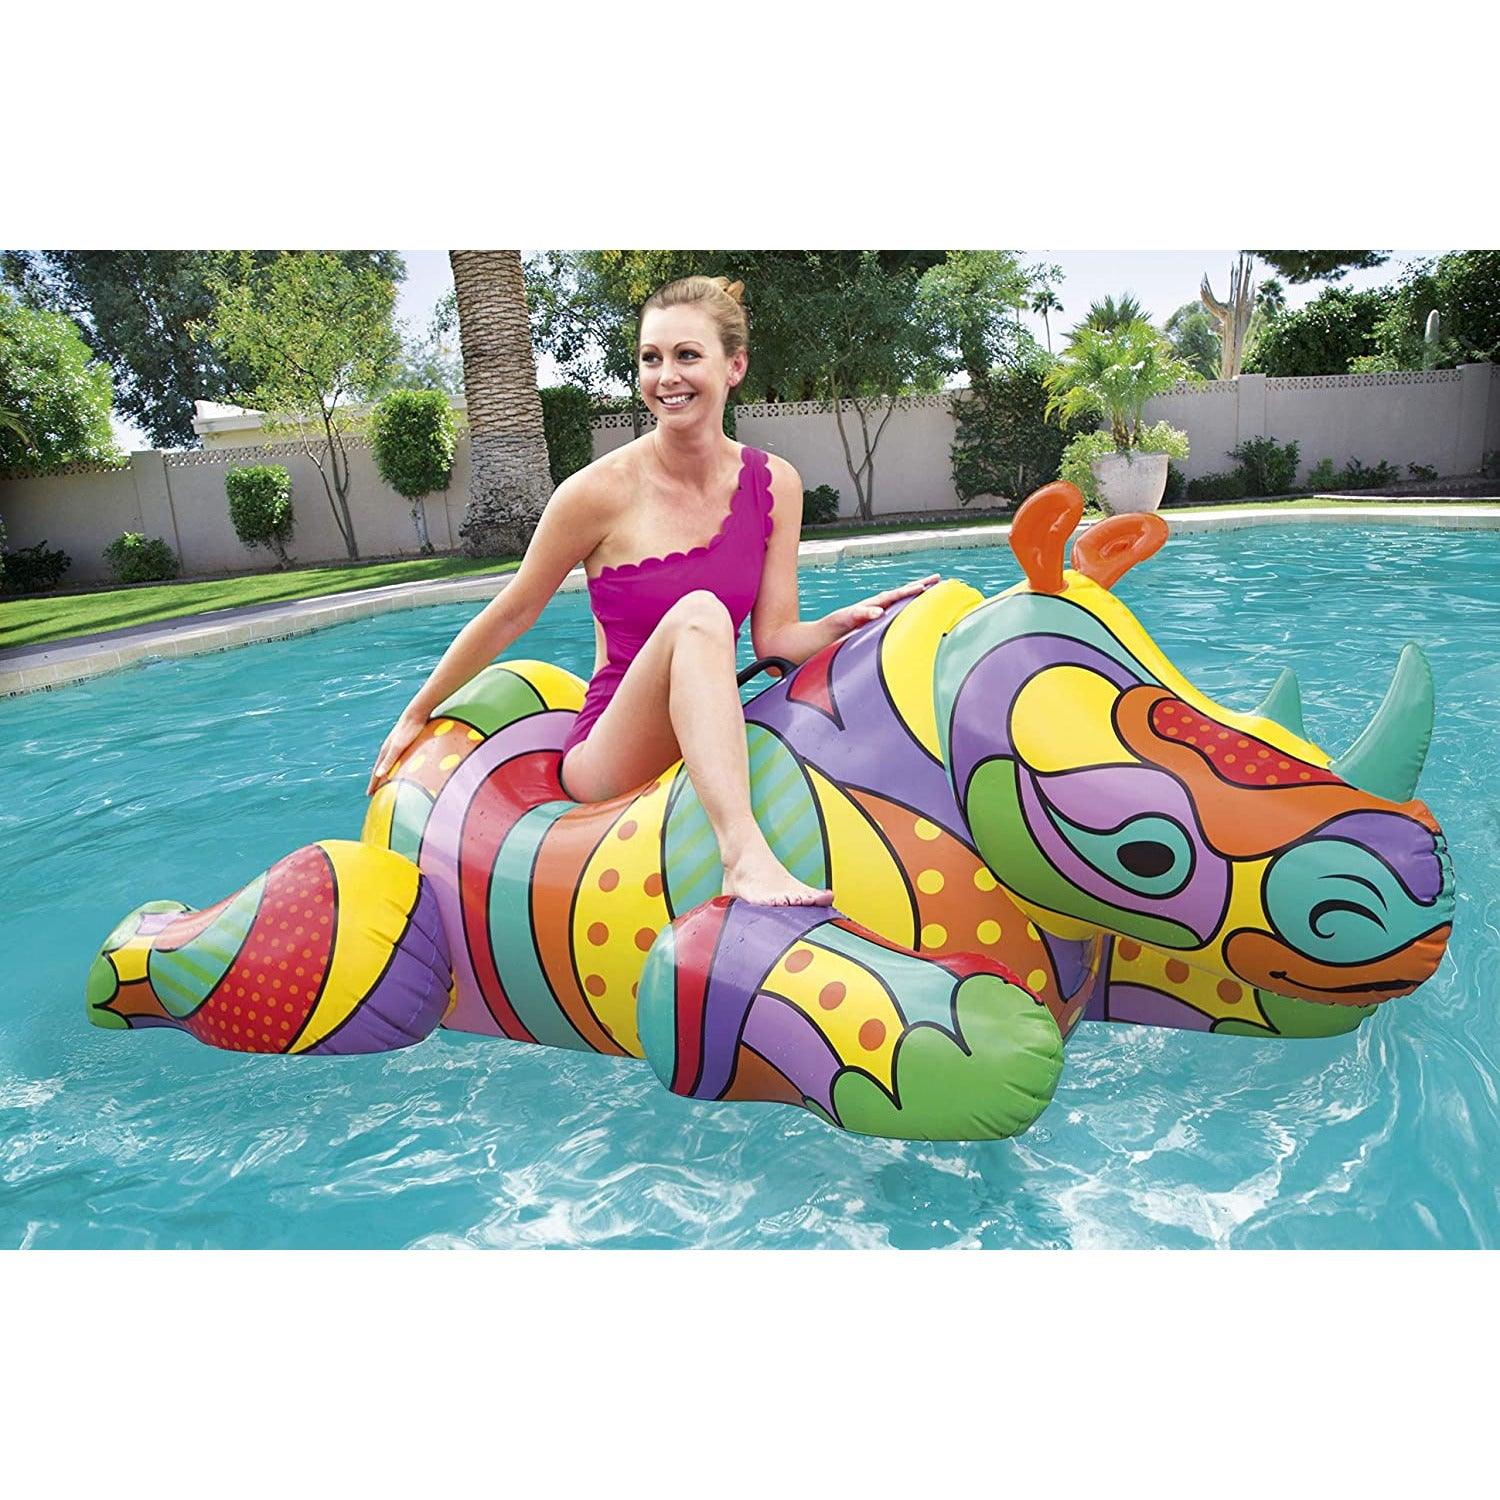 Bestway 41116 Pool Lake Inflatable Summer Party Ride-On Float w/Heavy-Duty Handles - Rhino - BumbleToys - 5-7 Years, Eagle Plus, Floaters, Girls, Sand Toys Pools & Inflatables